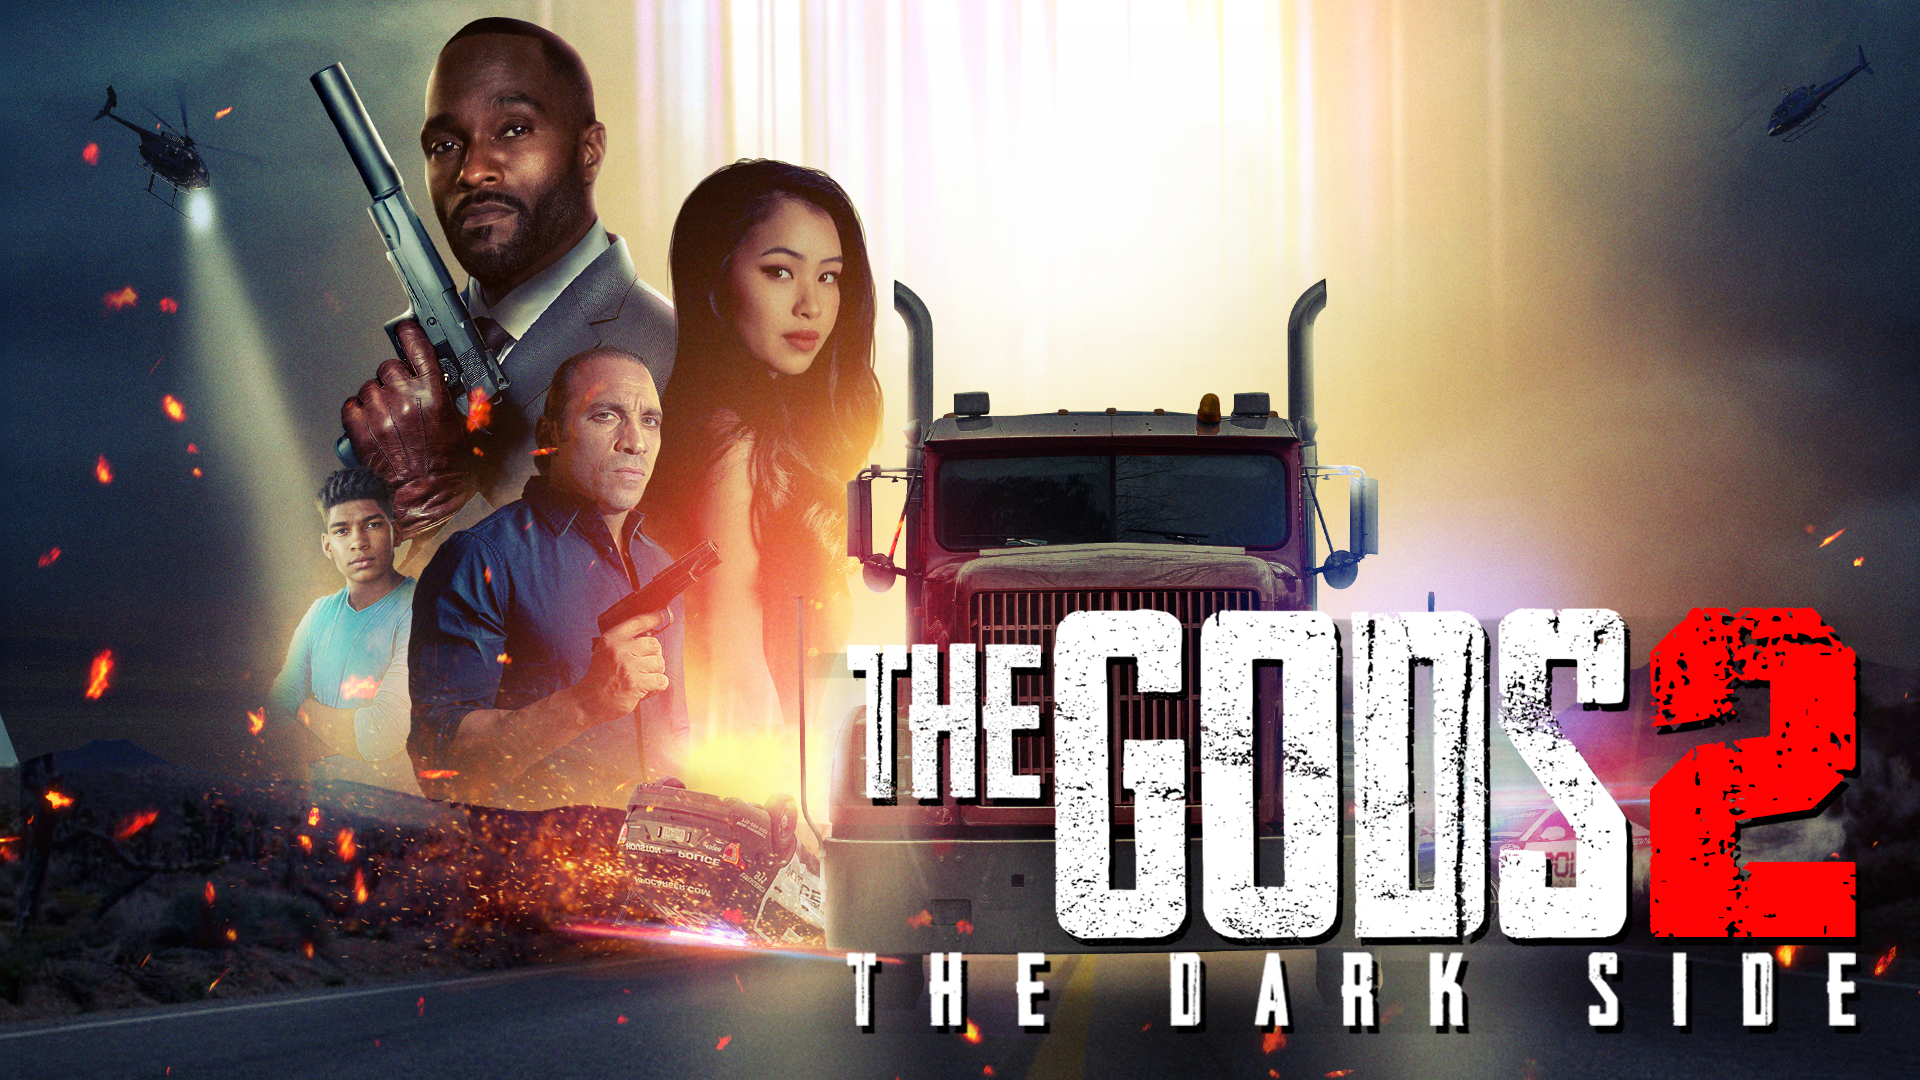 The Gods 2: The Dark Side Available Now On Tubi